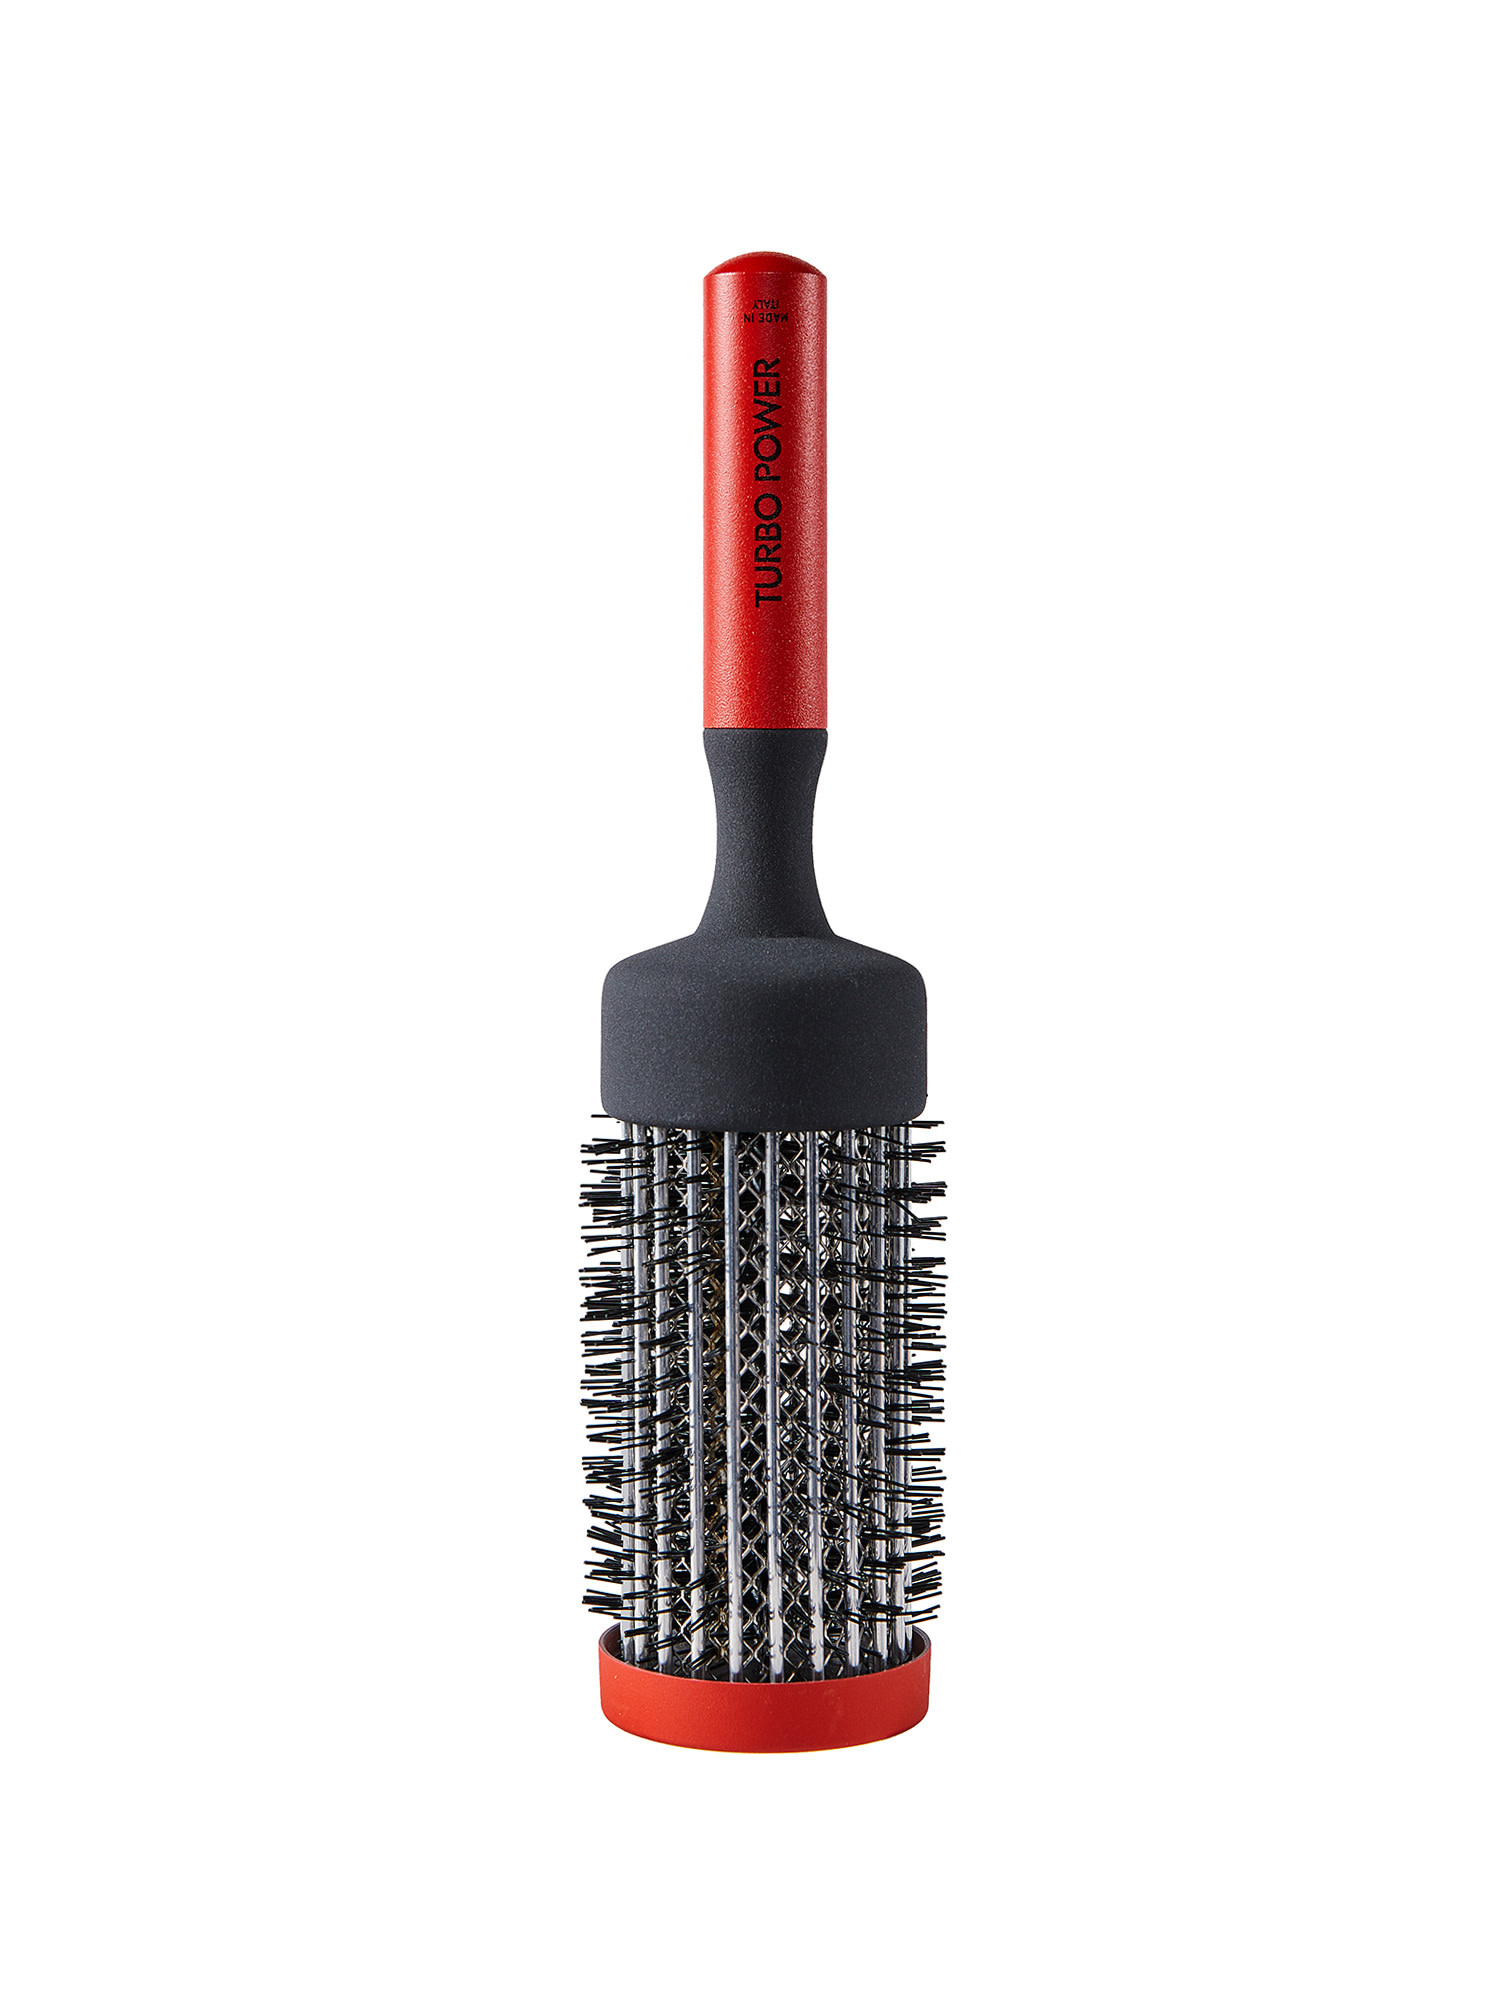 Turbo Power Products - Brushes & More Beauty Supply